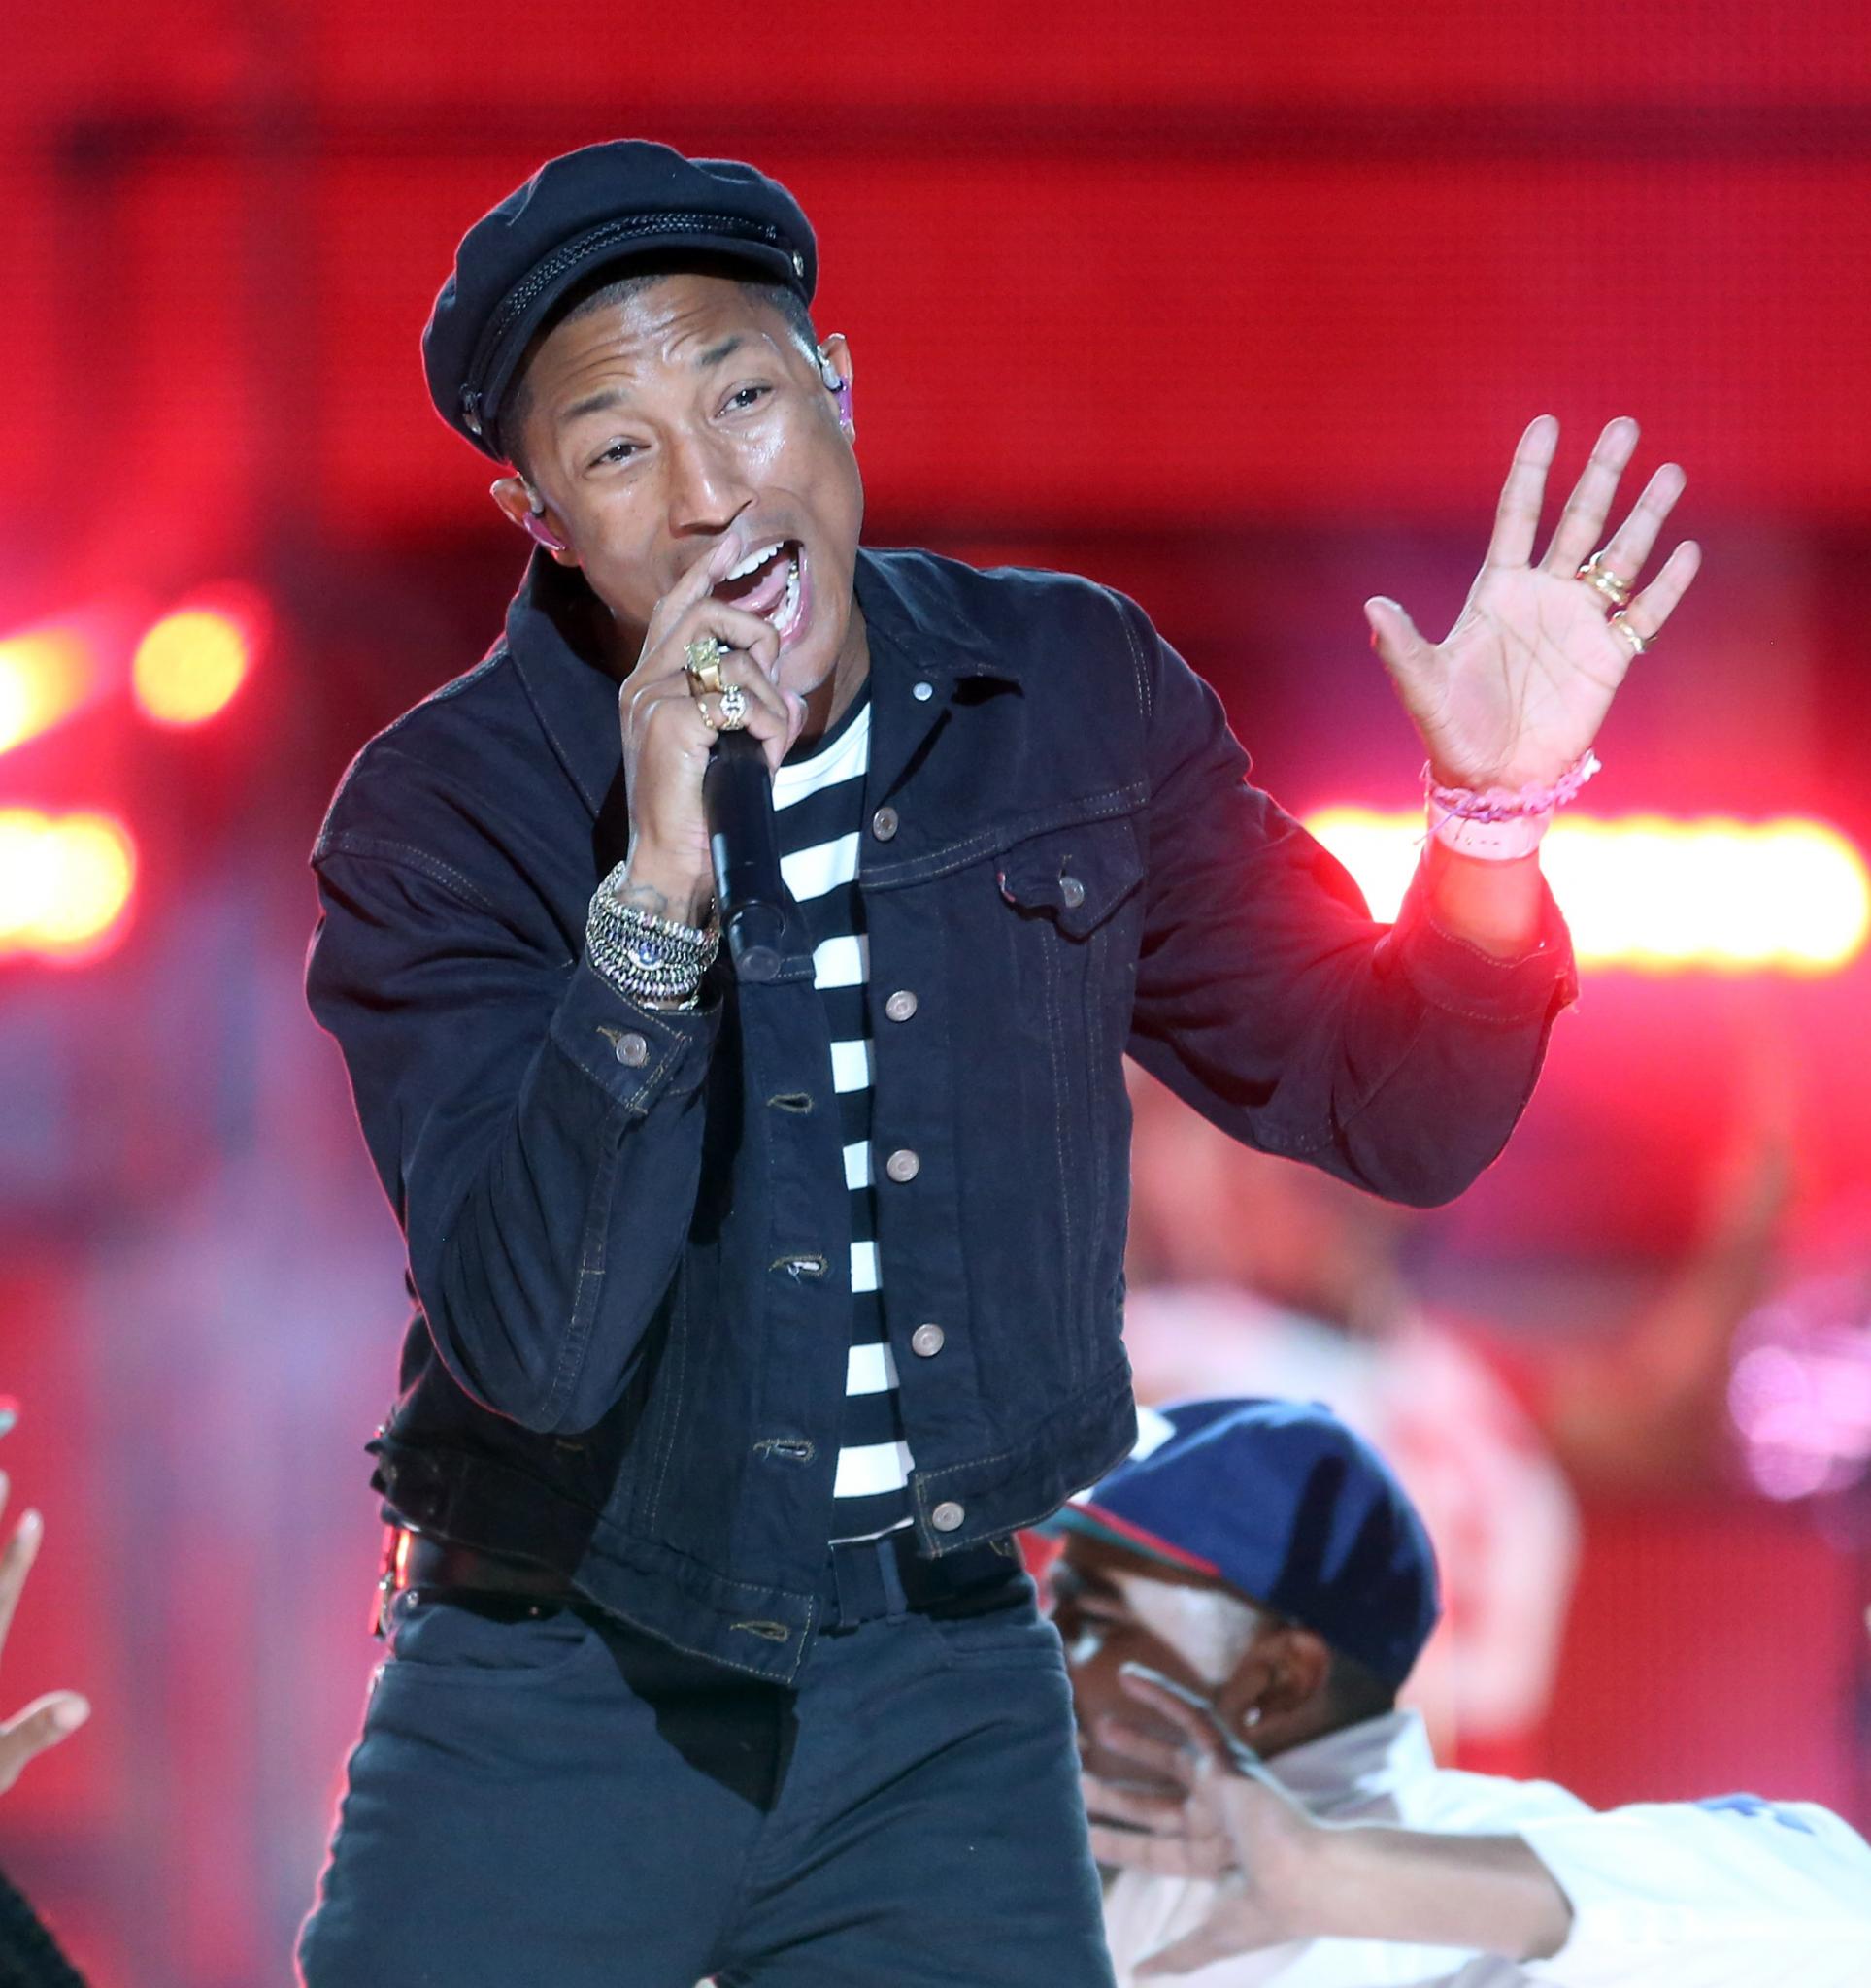 #ReadHappy: Pharrell Gives 50,000 Books to Children in Need